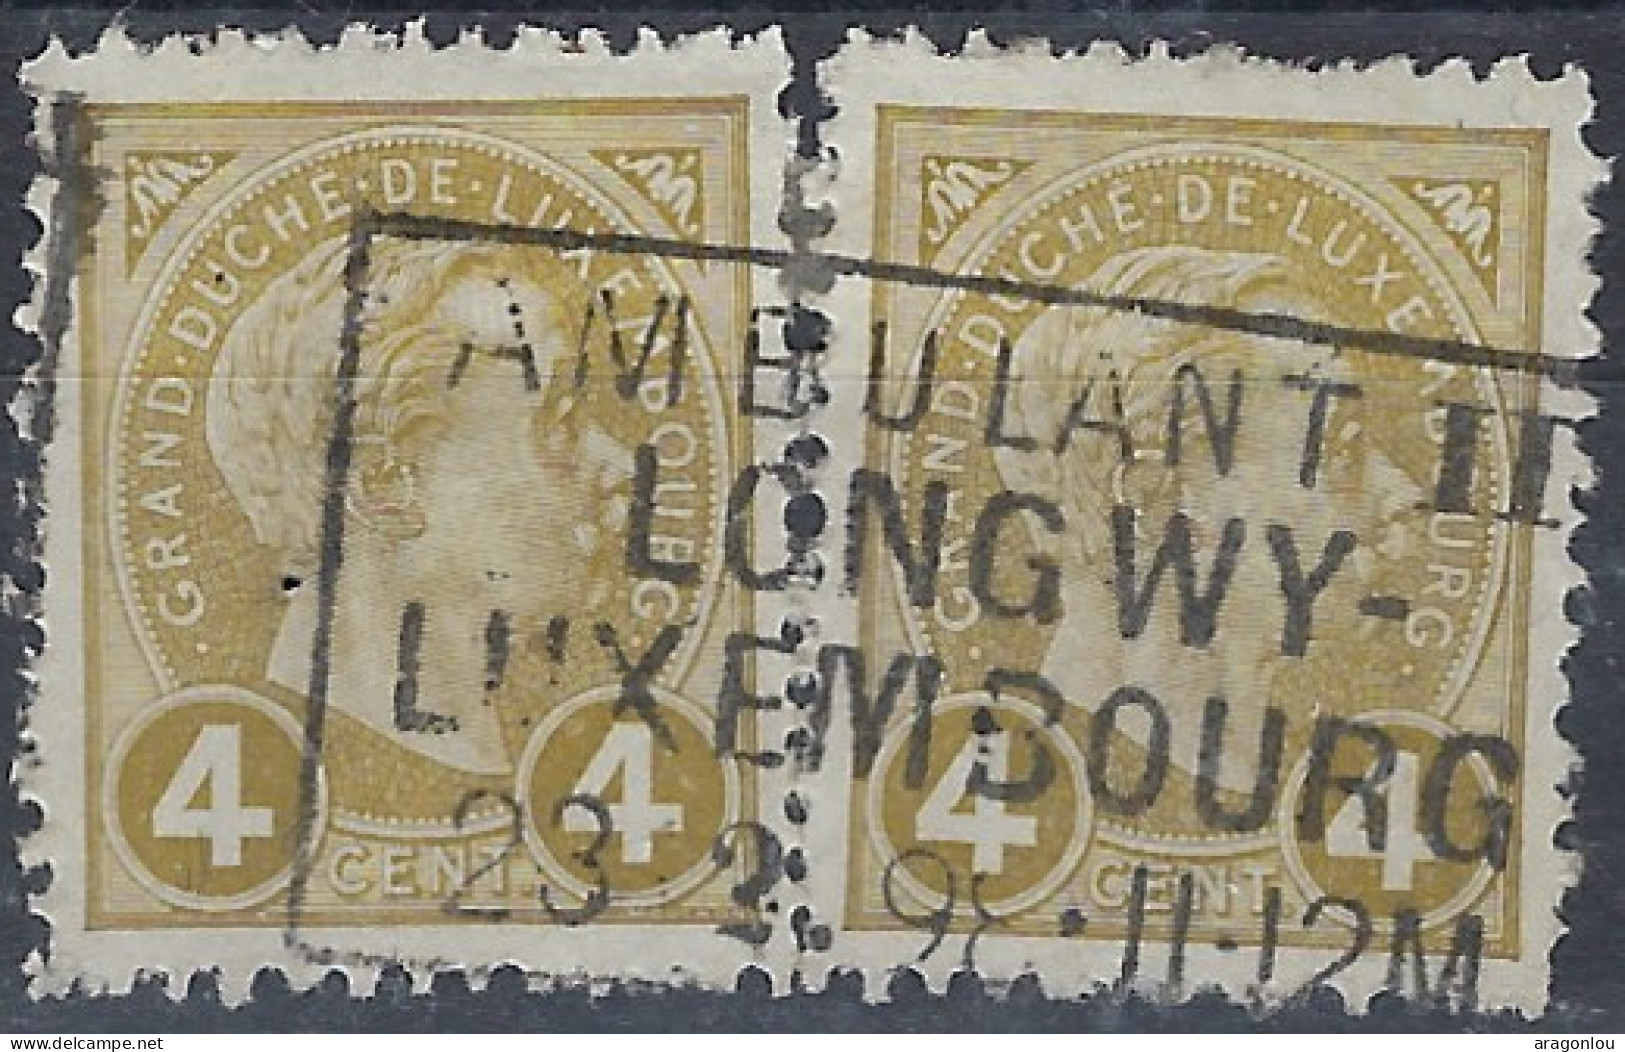 Luxembourg - Luxemburg - Timbres - Adolphe  -  Cachet  Ambulant  -  Longwy - Luxembourg   Paire   ° - 1895 Adolfo De Perfíl